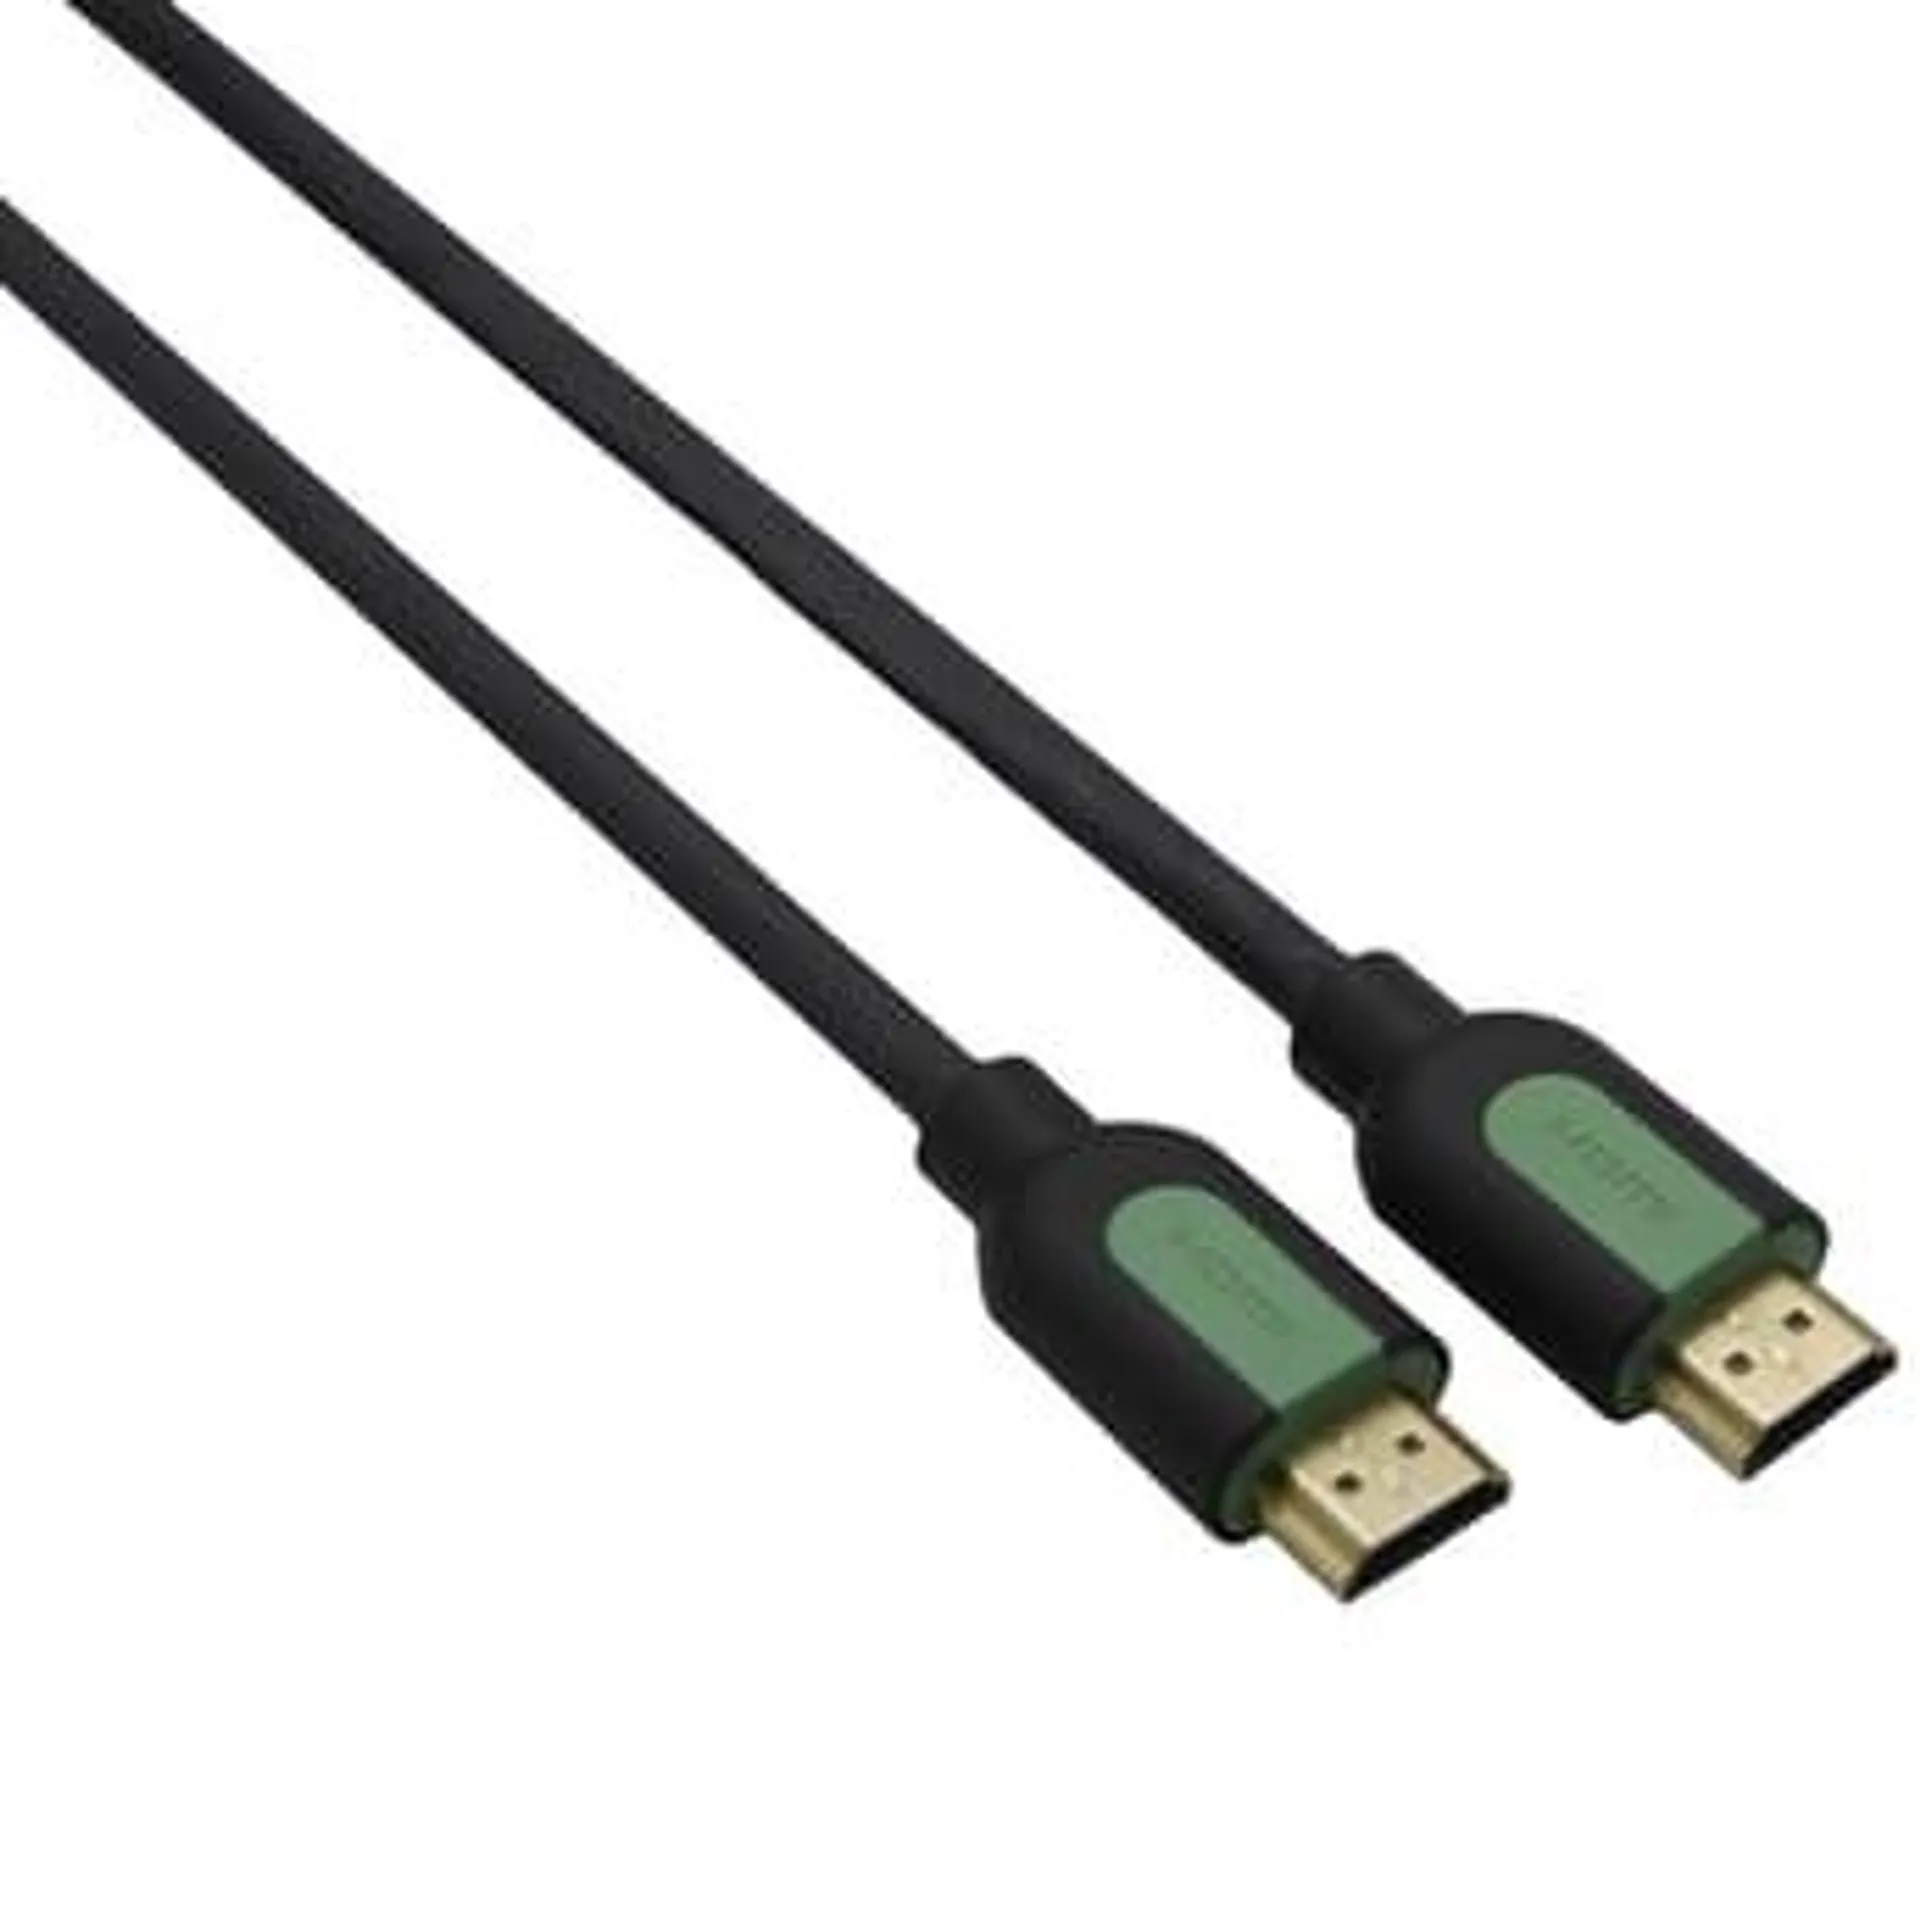 GIZZU High-Speed V2.0 HDMI Cable (1.8m)